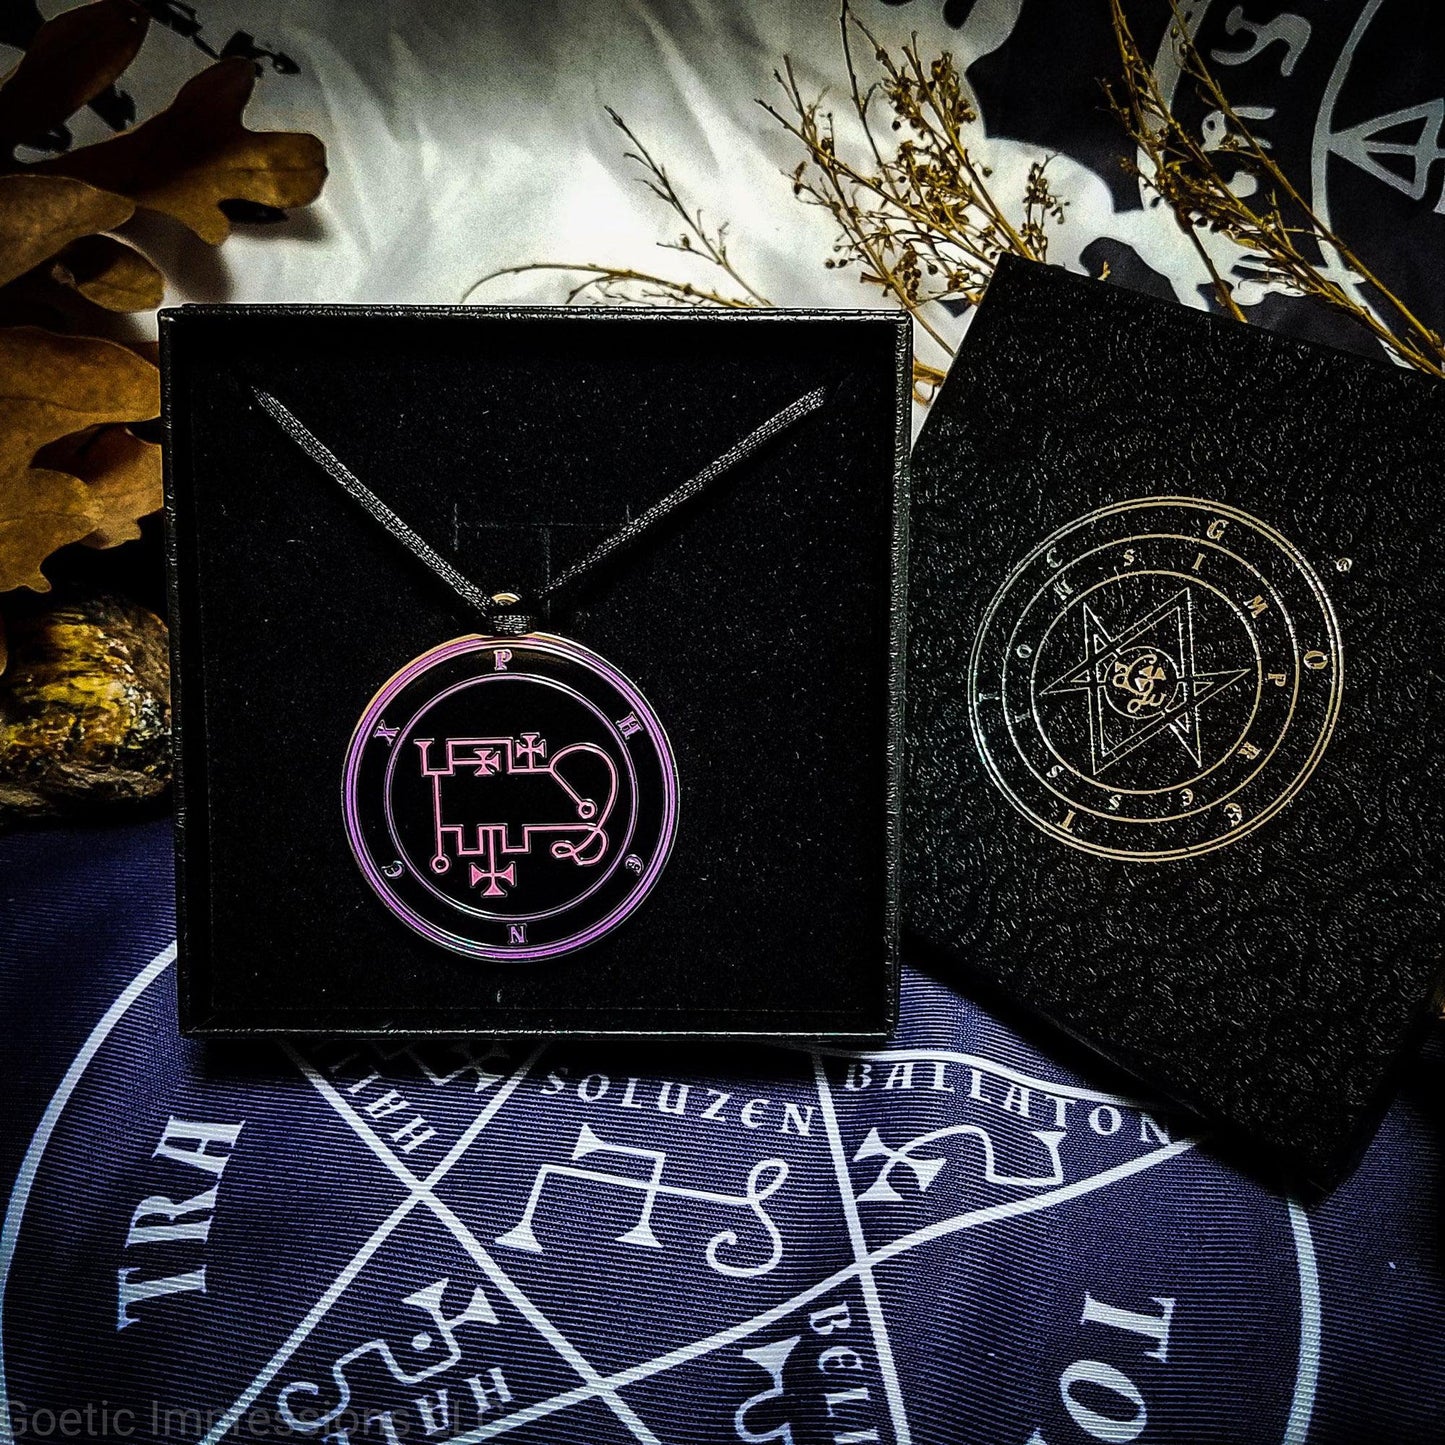 Necklace of Phenex in a Goetic Impressions gift box stamped in silver foil. The sigil for Phenex is pink. Phenex's name is surrounding the sigil with concentric circles in purple on a black background. The seal is silver plated. The box is on a purple altar cloth with the Tetragrammaton in white.